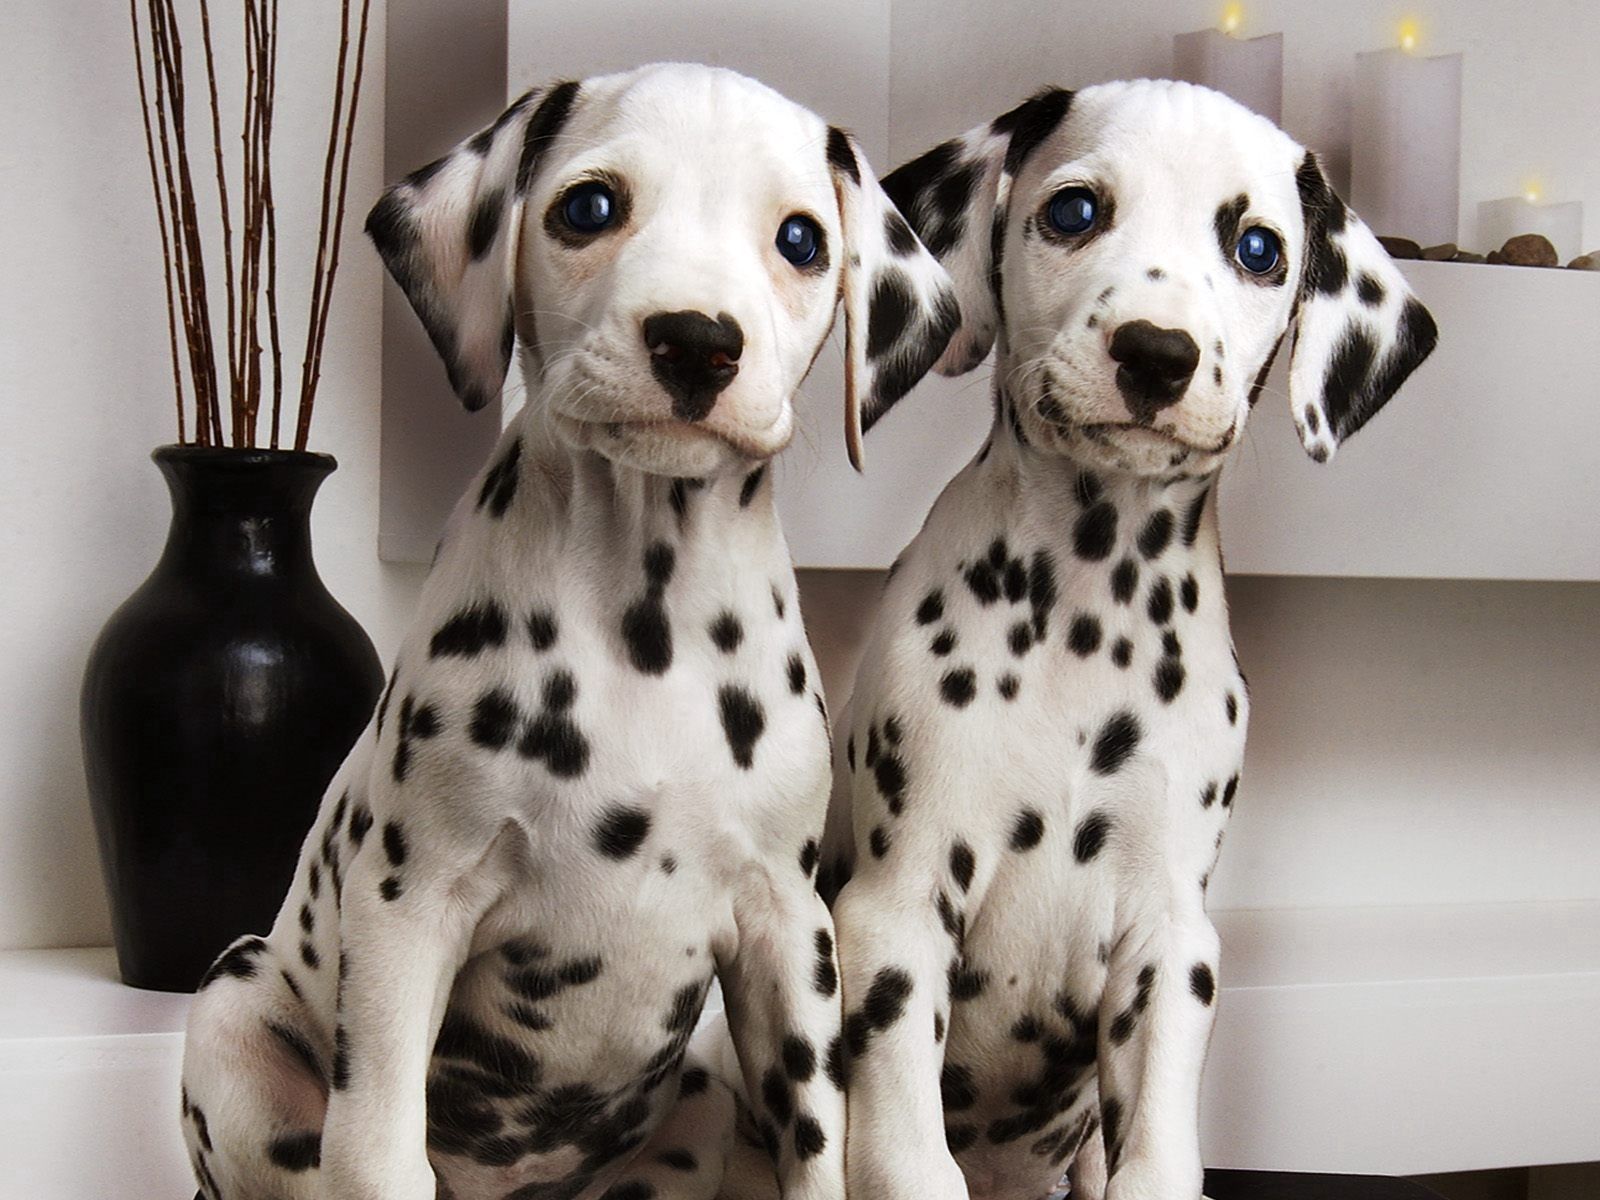 animals, couple, pair, spotted, spotty, dalmatians, puppies, dalmatines